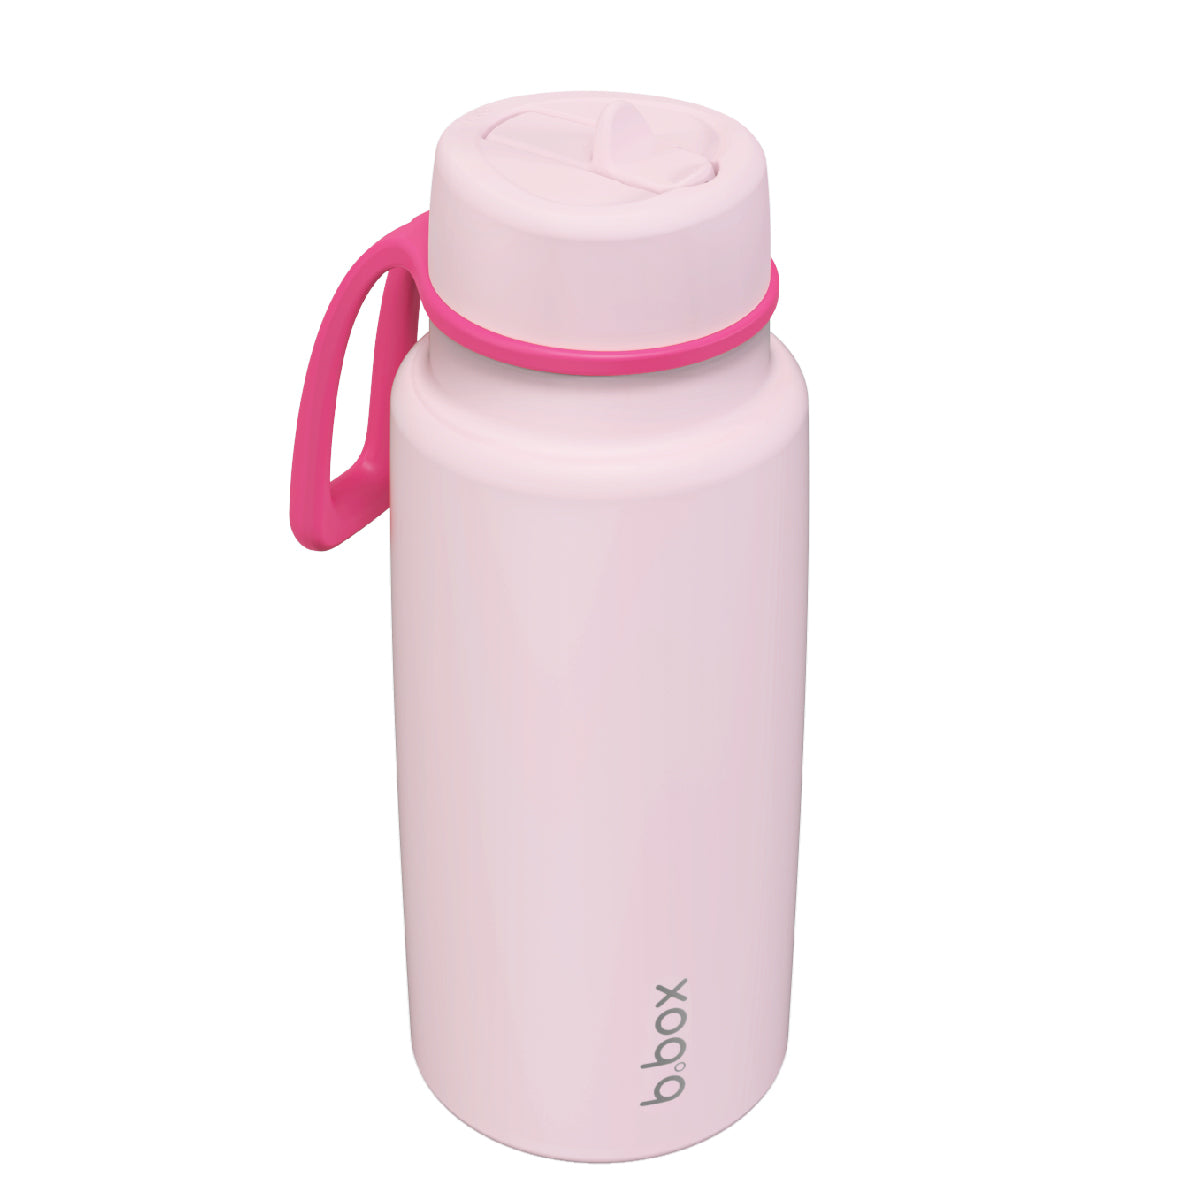 B.box Insulated Flip Top 1 Litre Drink Bottle - Pink Paradise